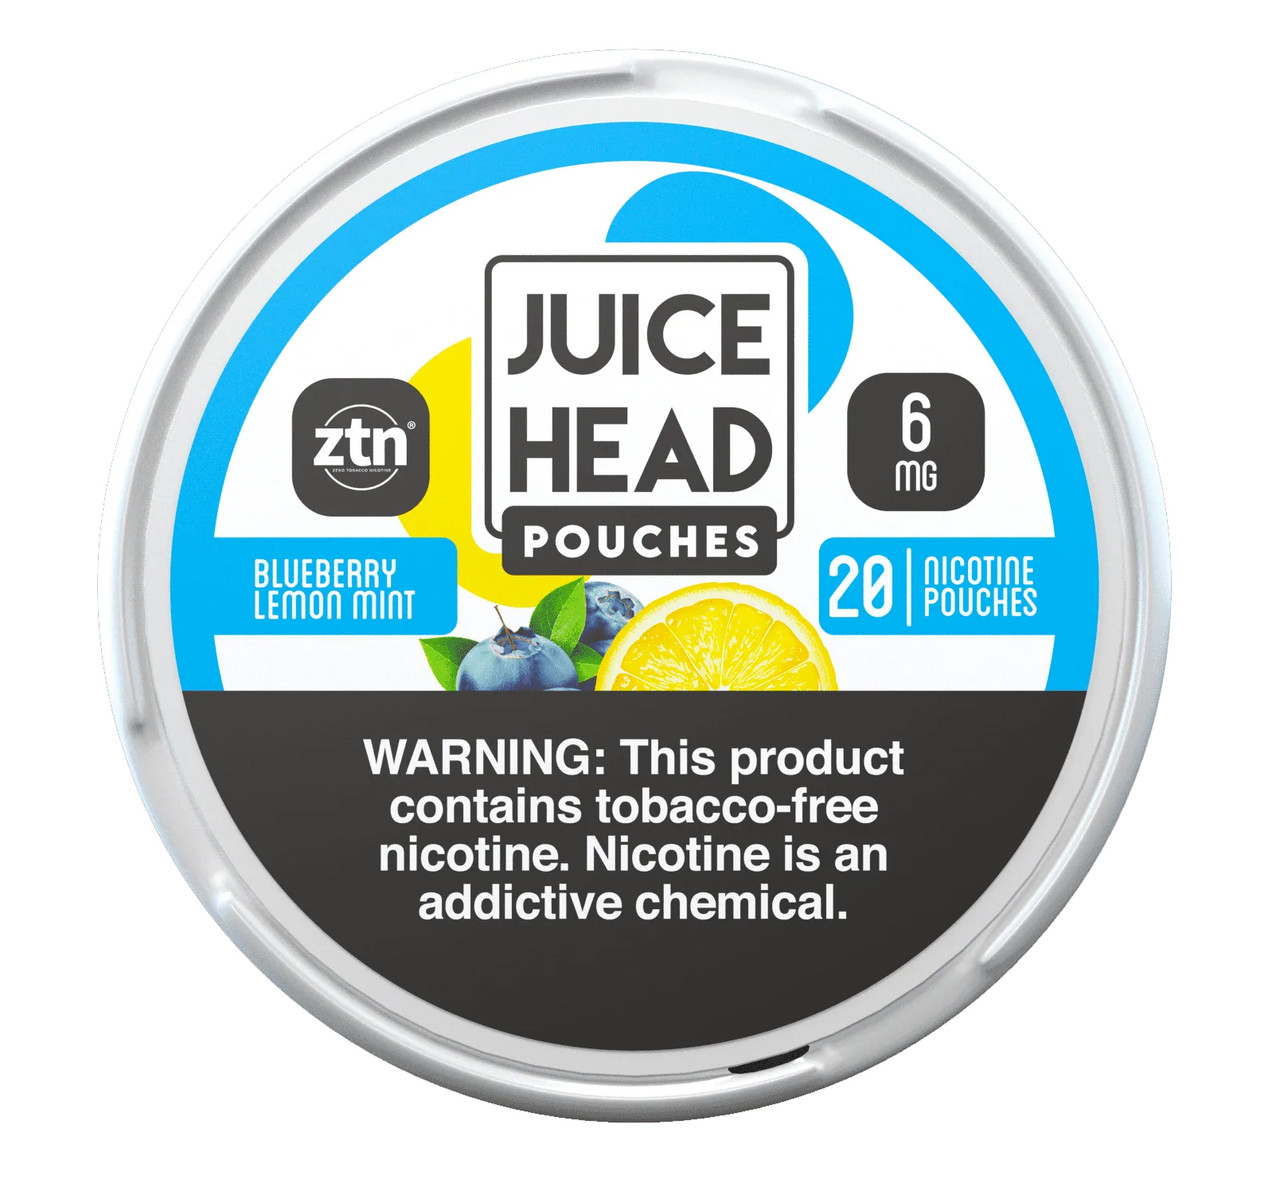 Juice Head Tobacco Free Nicotine 6MG Pouches - 1 Can Blueberry Lemon Mint